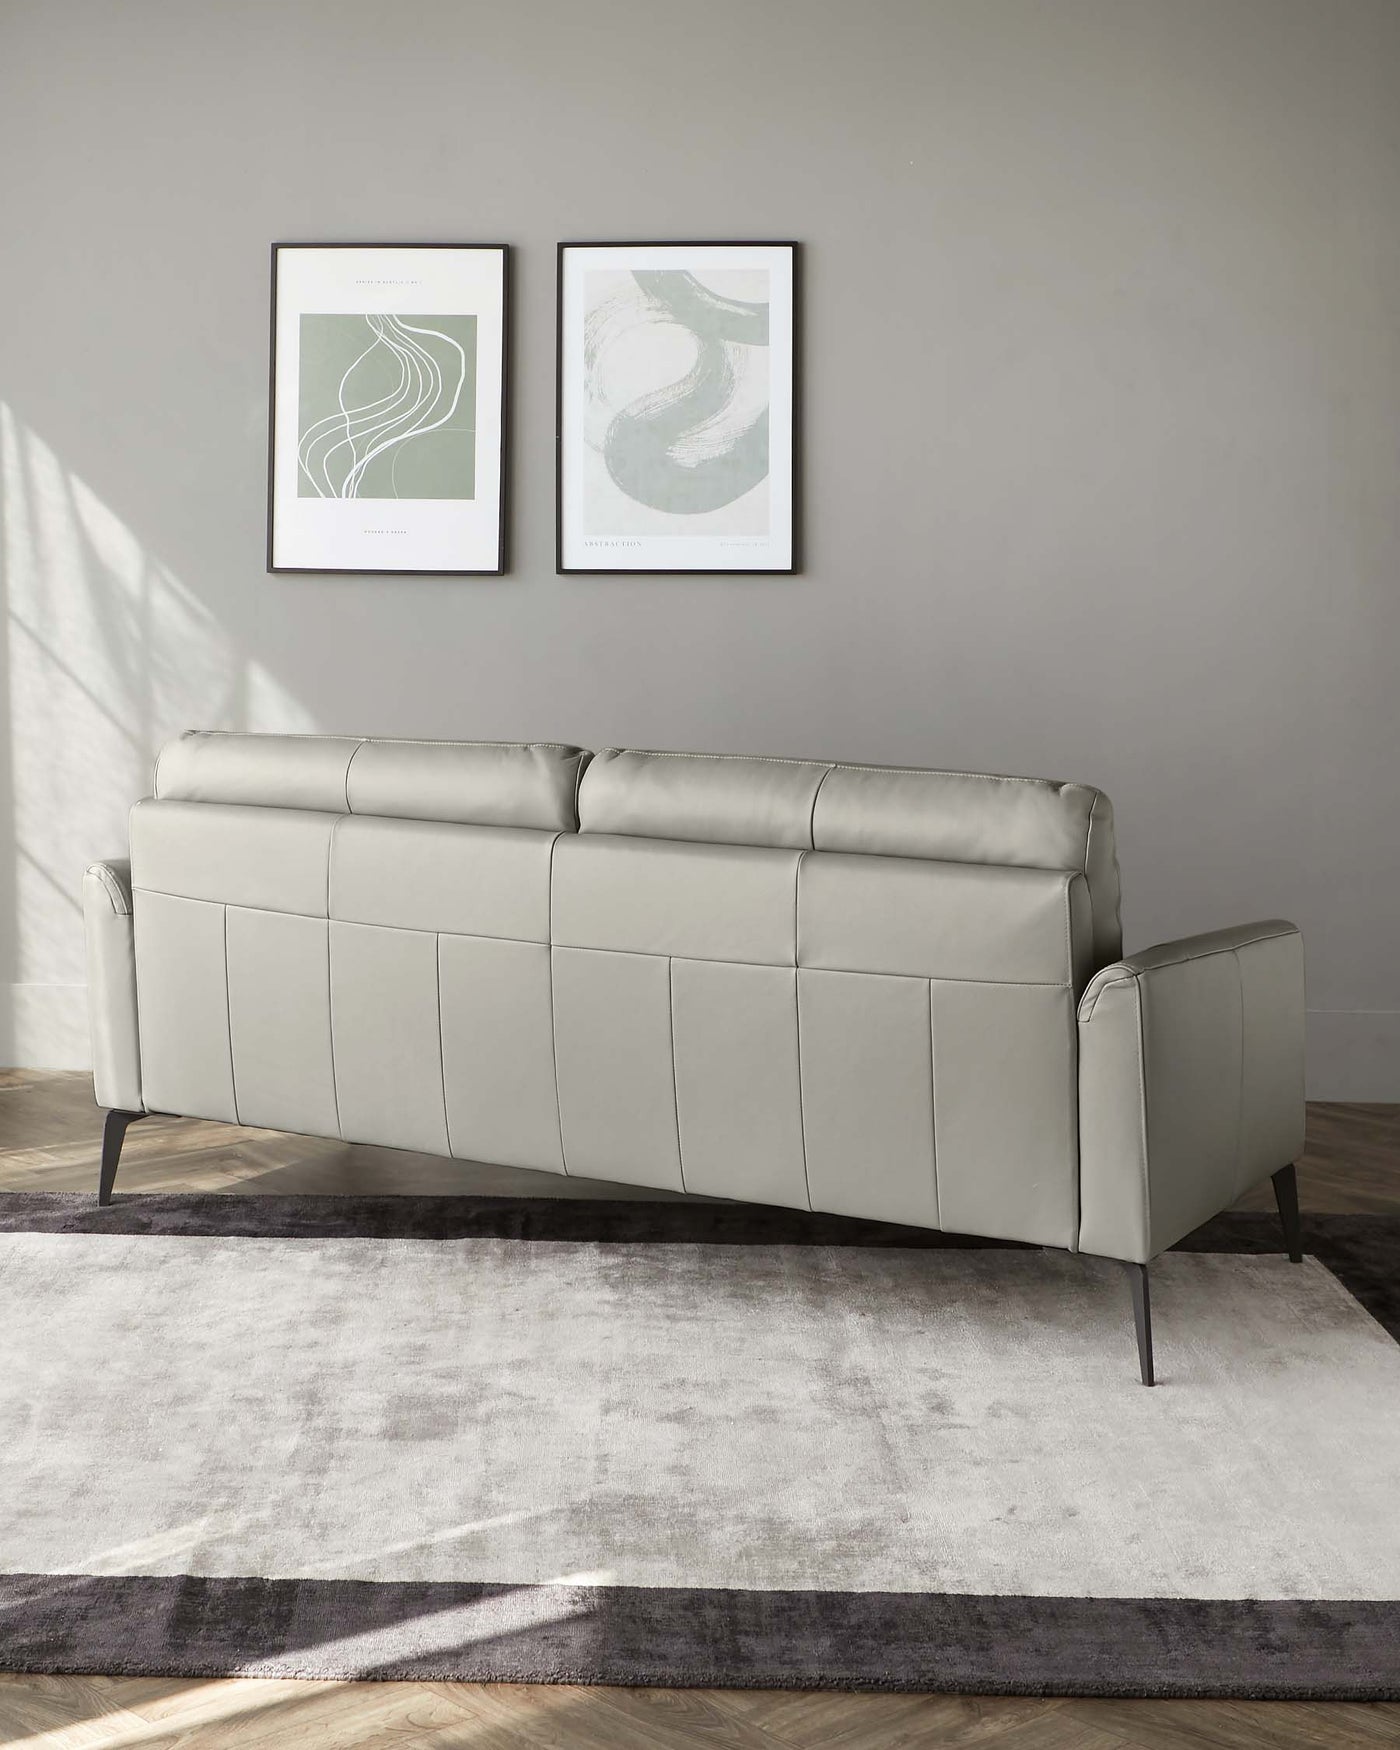 Modern light grey upholstered sofa with a linear tufted backrest and sleek metallic legs, situated on a two-toned grey area rug.